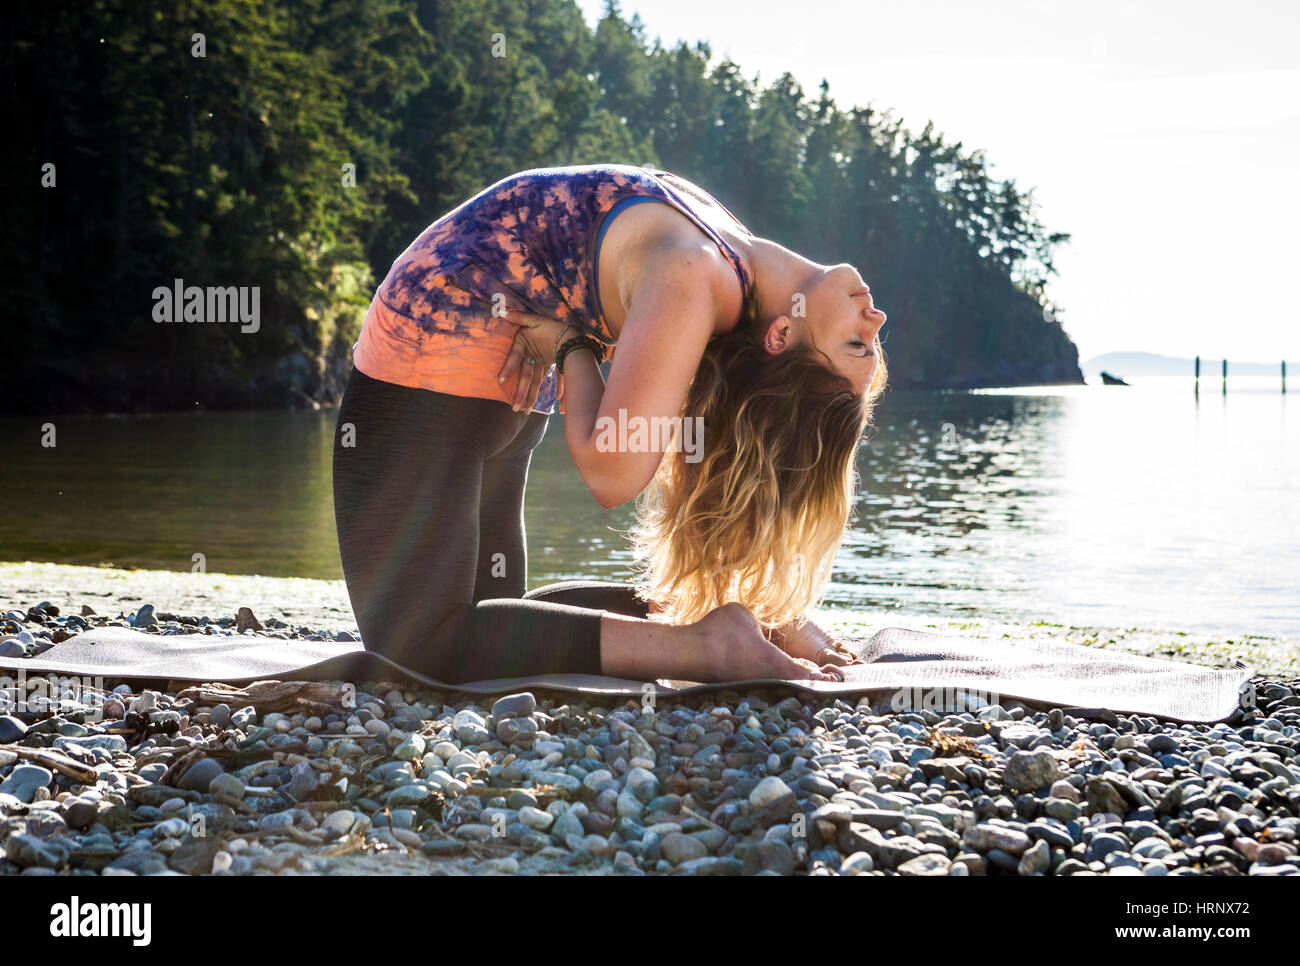 A woman practicing yoga in a beautiful outdoor setting. Stock Photo